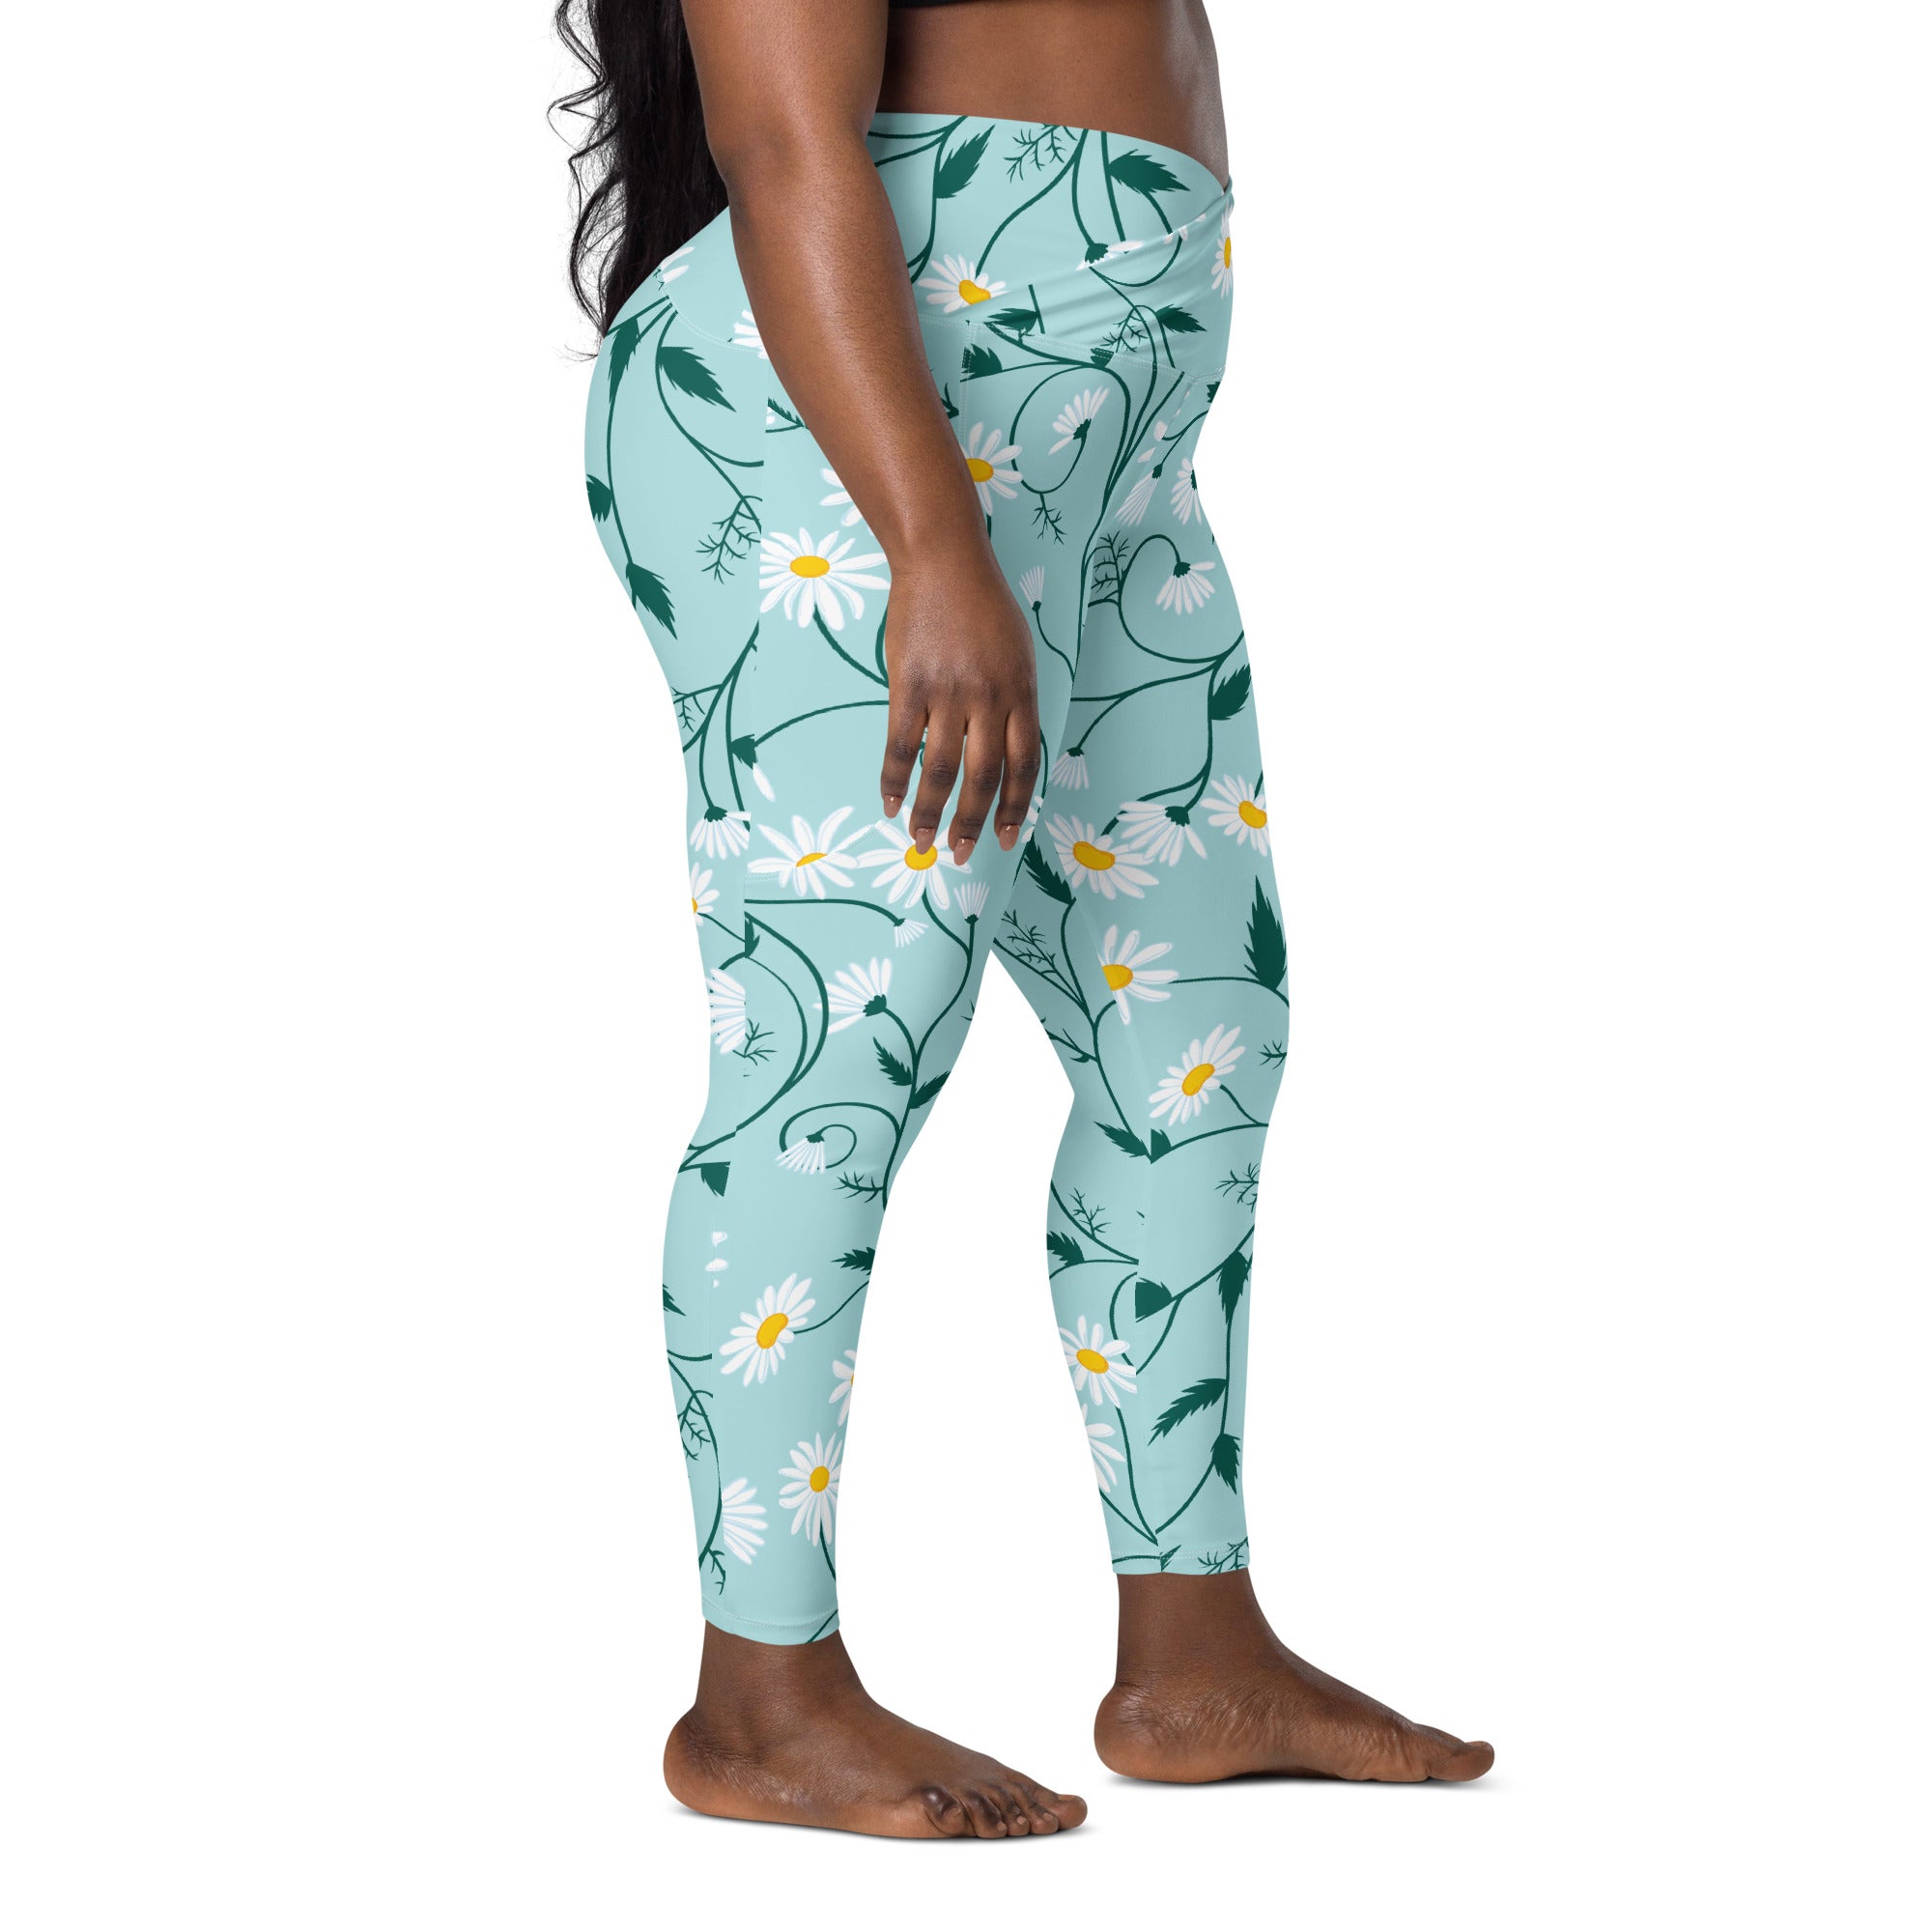 Daisy Bloom Plus Size Crossover Leggings with Pockets